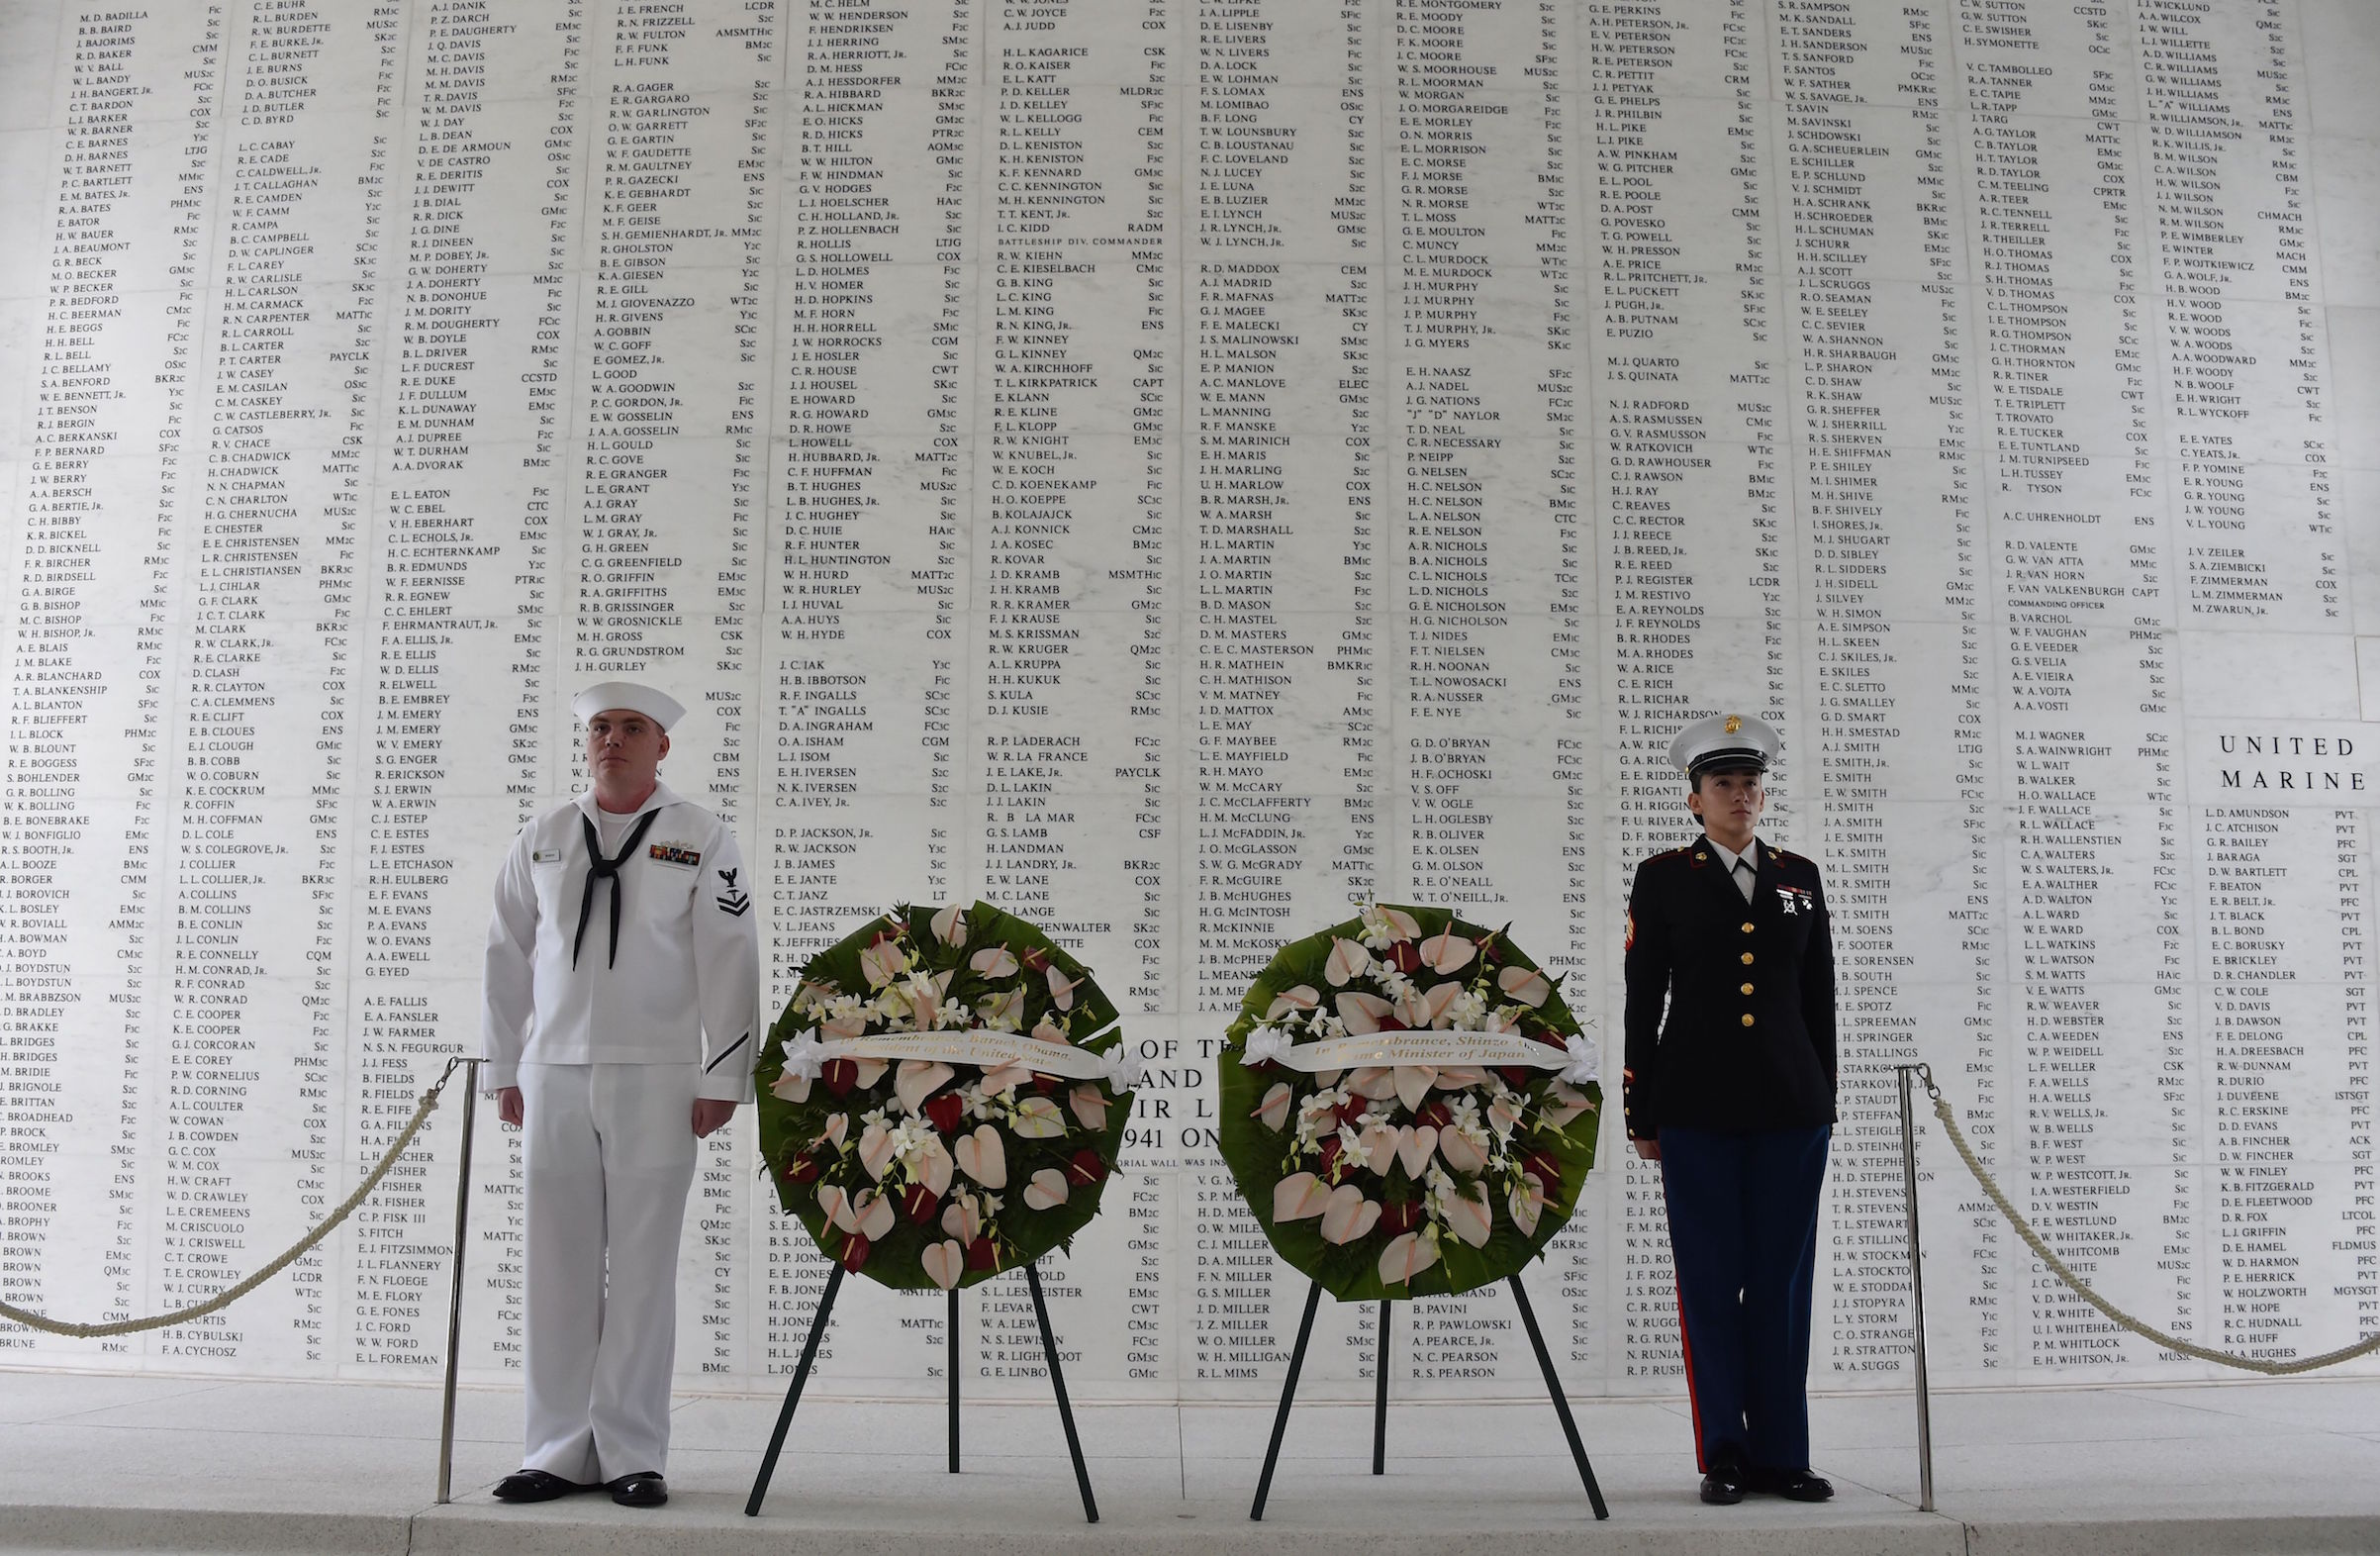 Two members of the U.S. military stand at attention after U.S. President Barack Obama and Japanese Prime Minister Shinzo Abe laid wreaths at the USS Arizona Memorial on Dec. 27, 2016 at Pearl Harbor in Honolulu. (Nicholas Kamm—AFP/Getty Images)